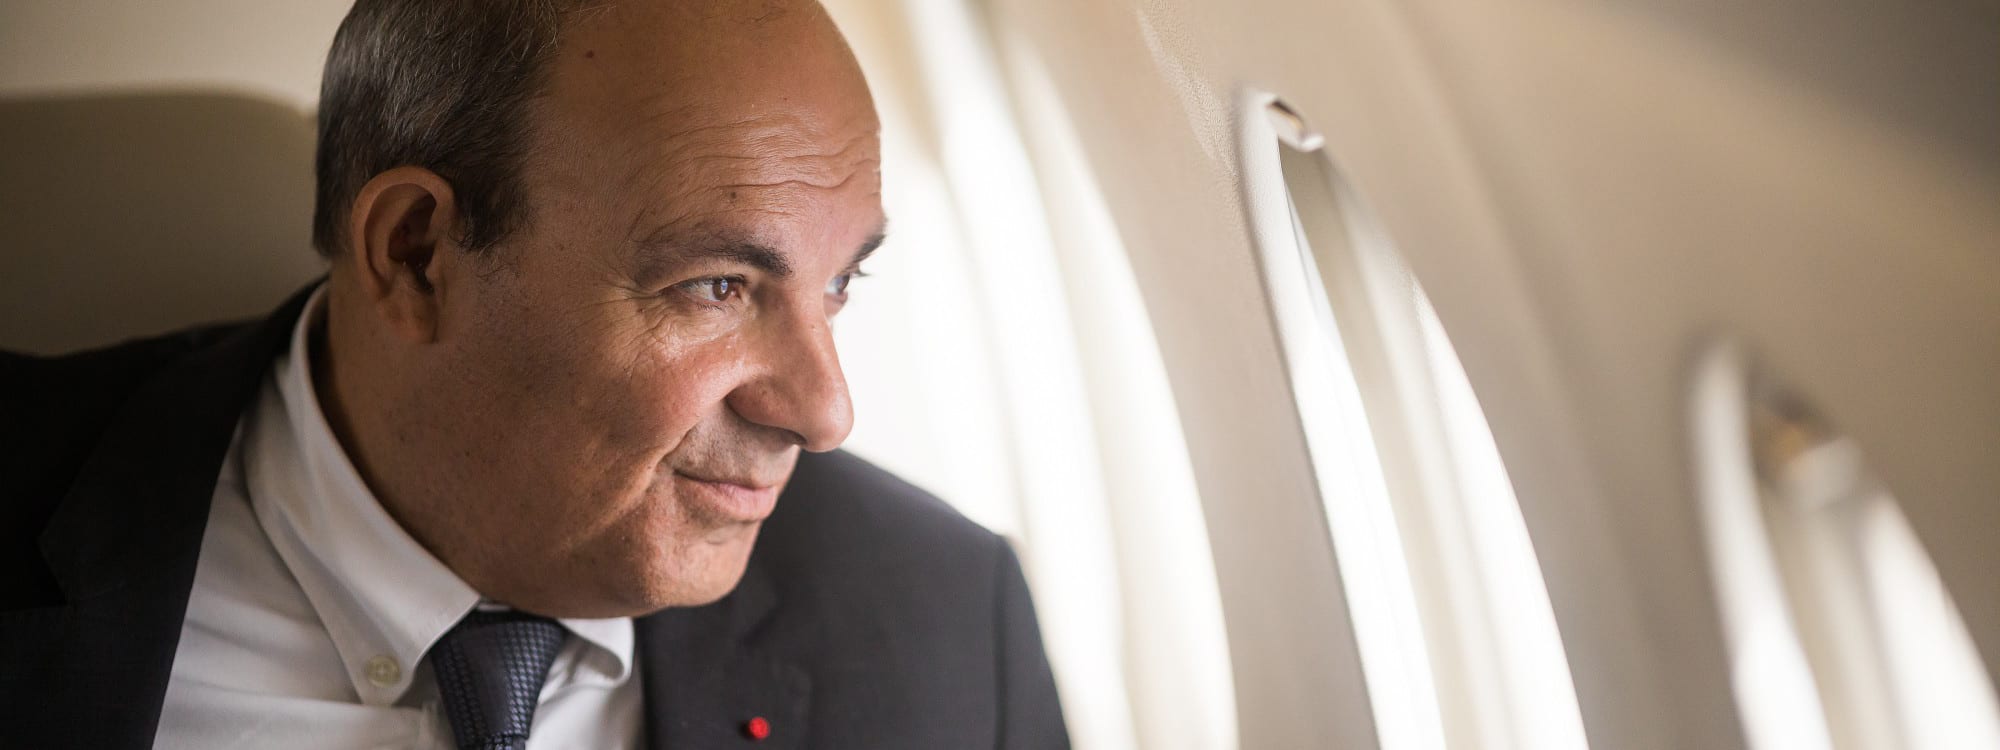 Éric Trappier, Chairman and Chief Executive Officer of Dassault Aviation